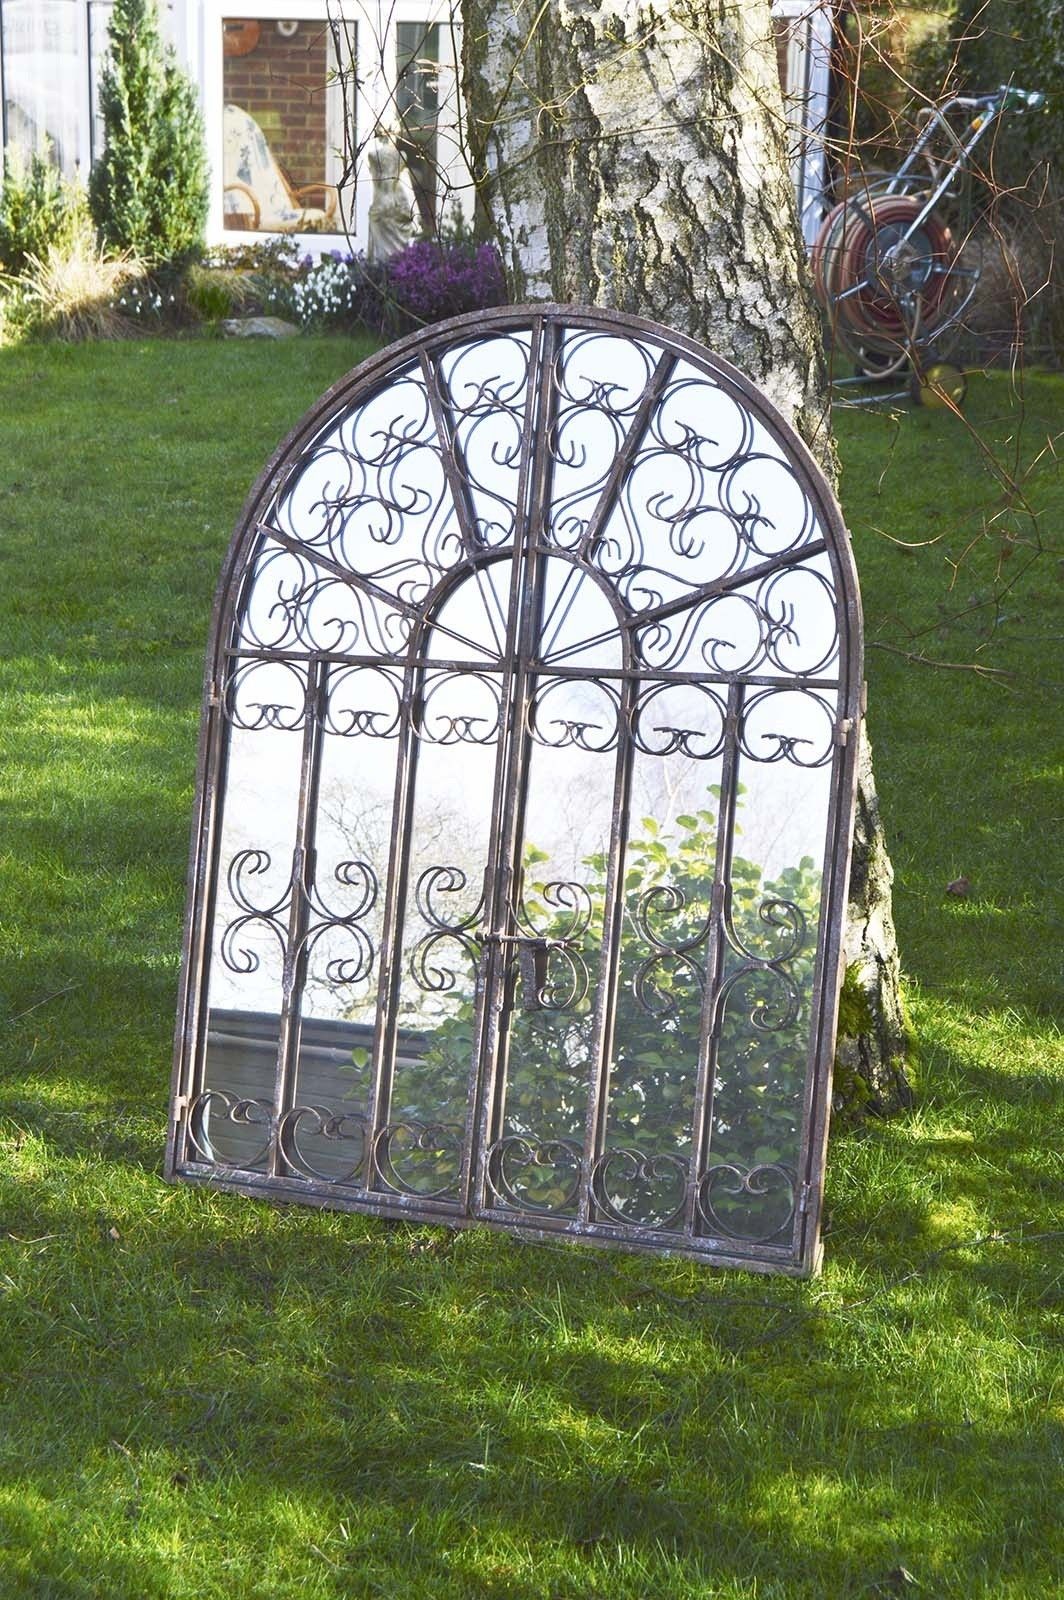 Large Scroll Outdoor Garden Ornate Shab Chic Big Wall Mirror For Large Outdoor Garden Mirrors (View 13 of 15)